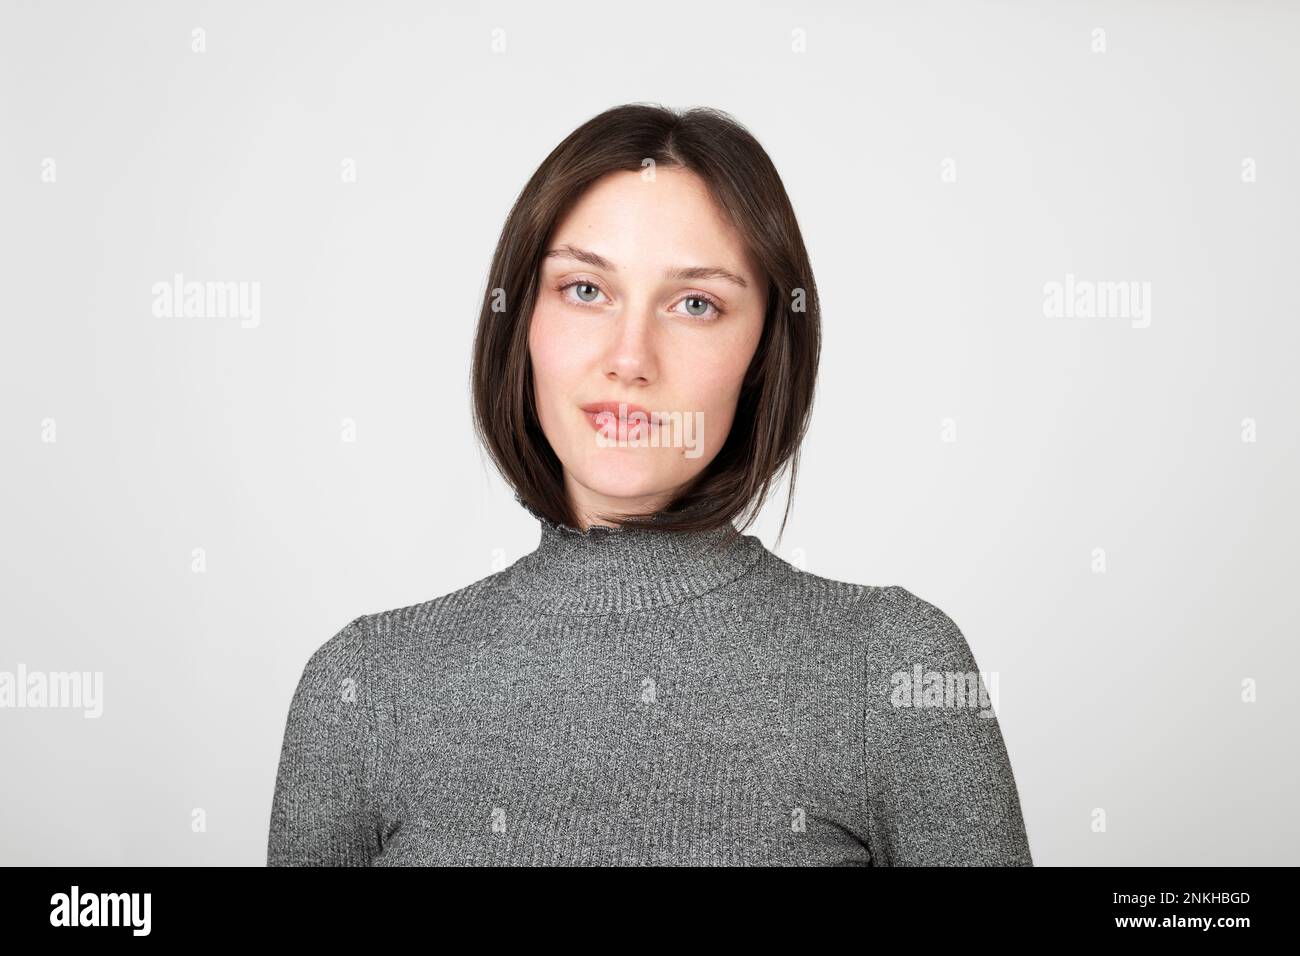 Confident young woman wearing turtleneck against white background Stock ...